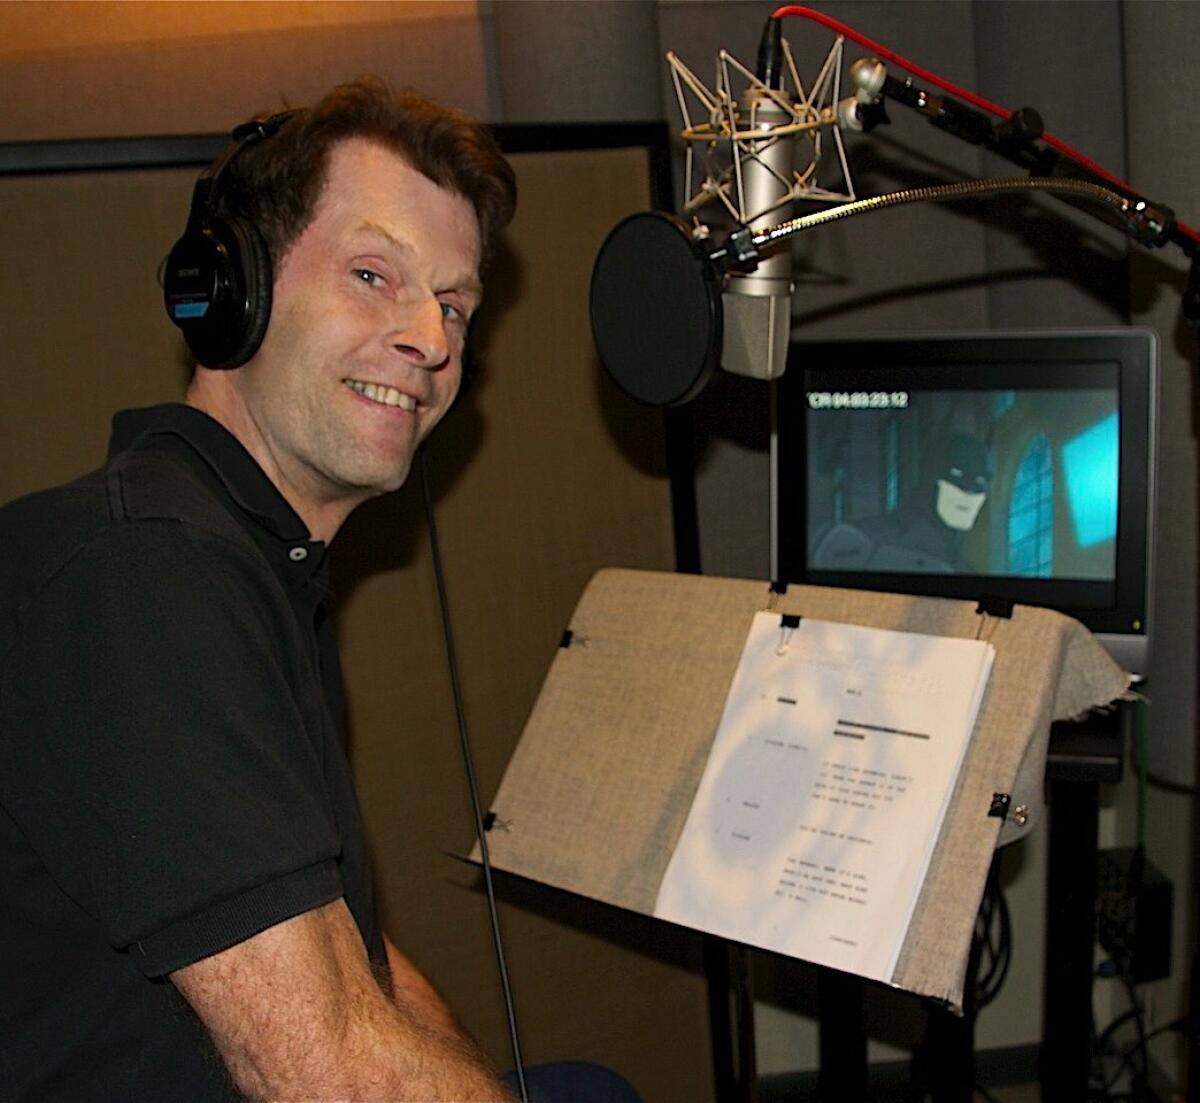 A man wearing headphones sits in front of a script and monitor in a voiceover booth